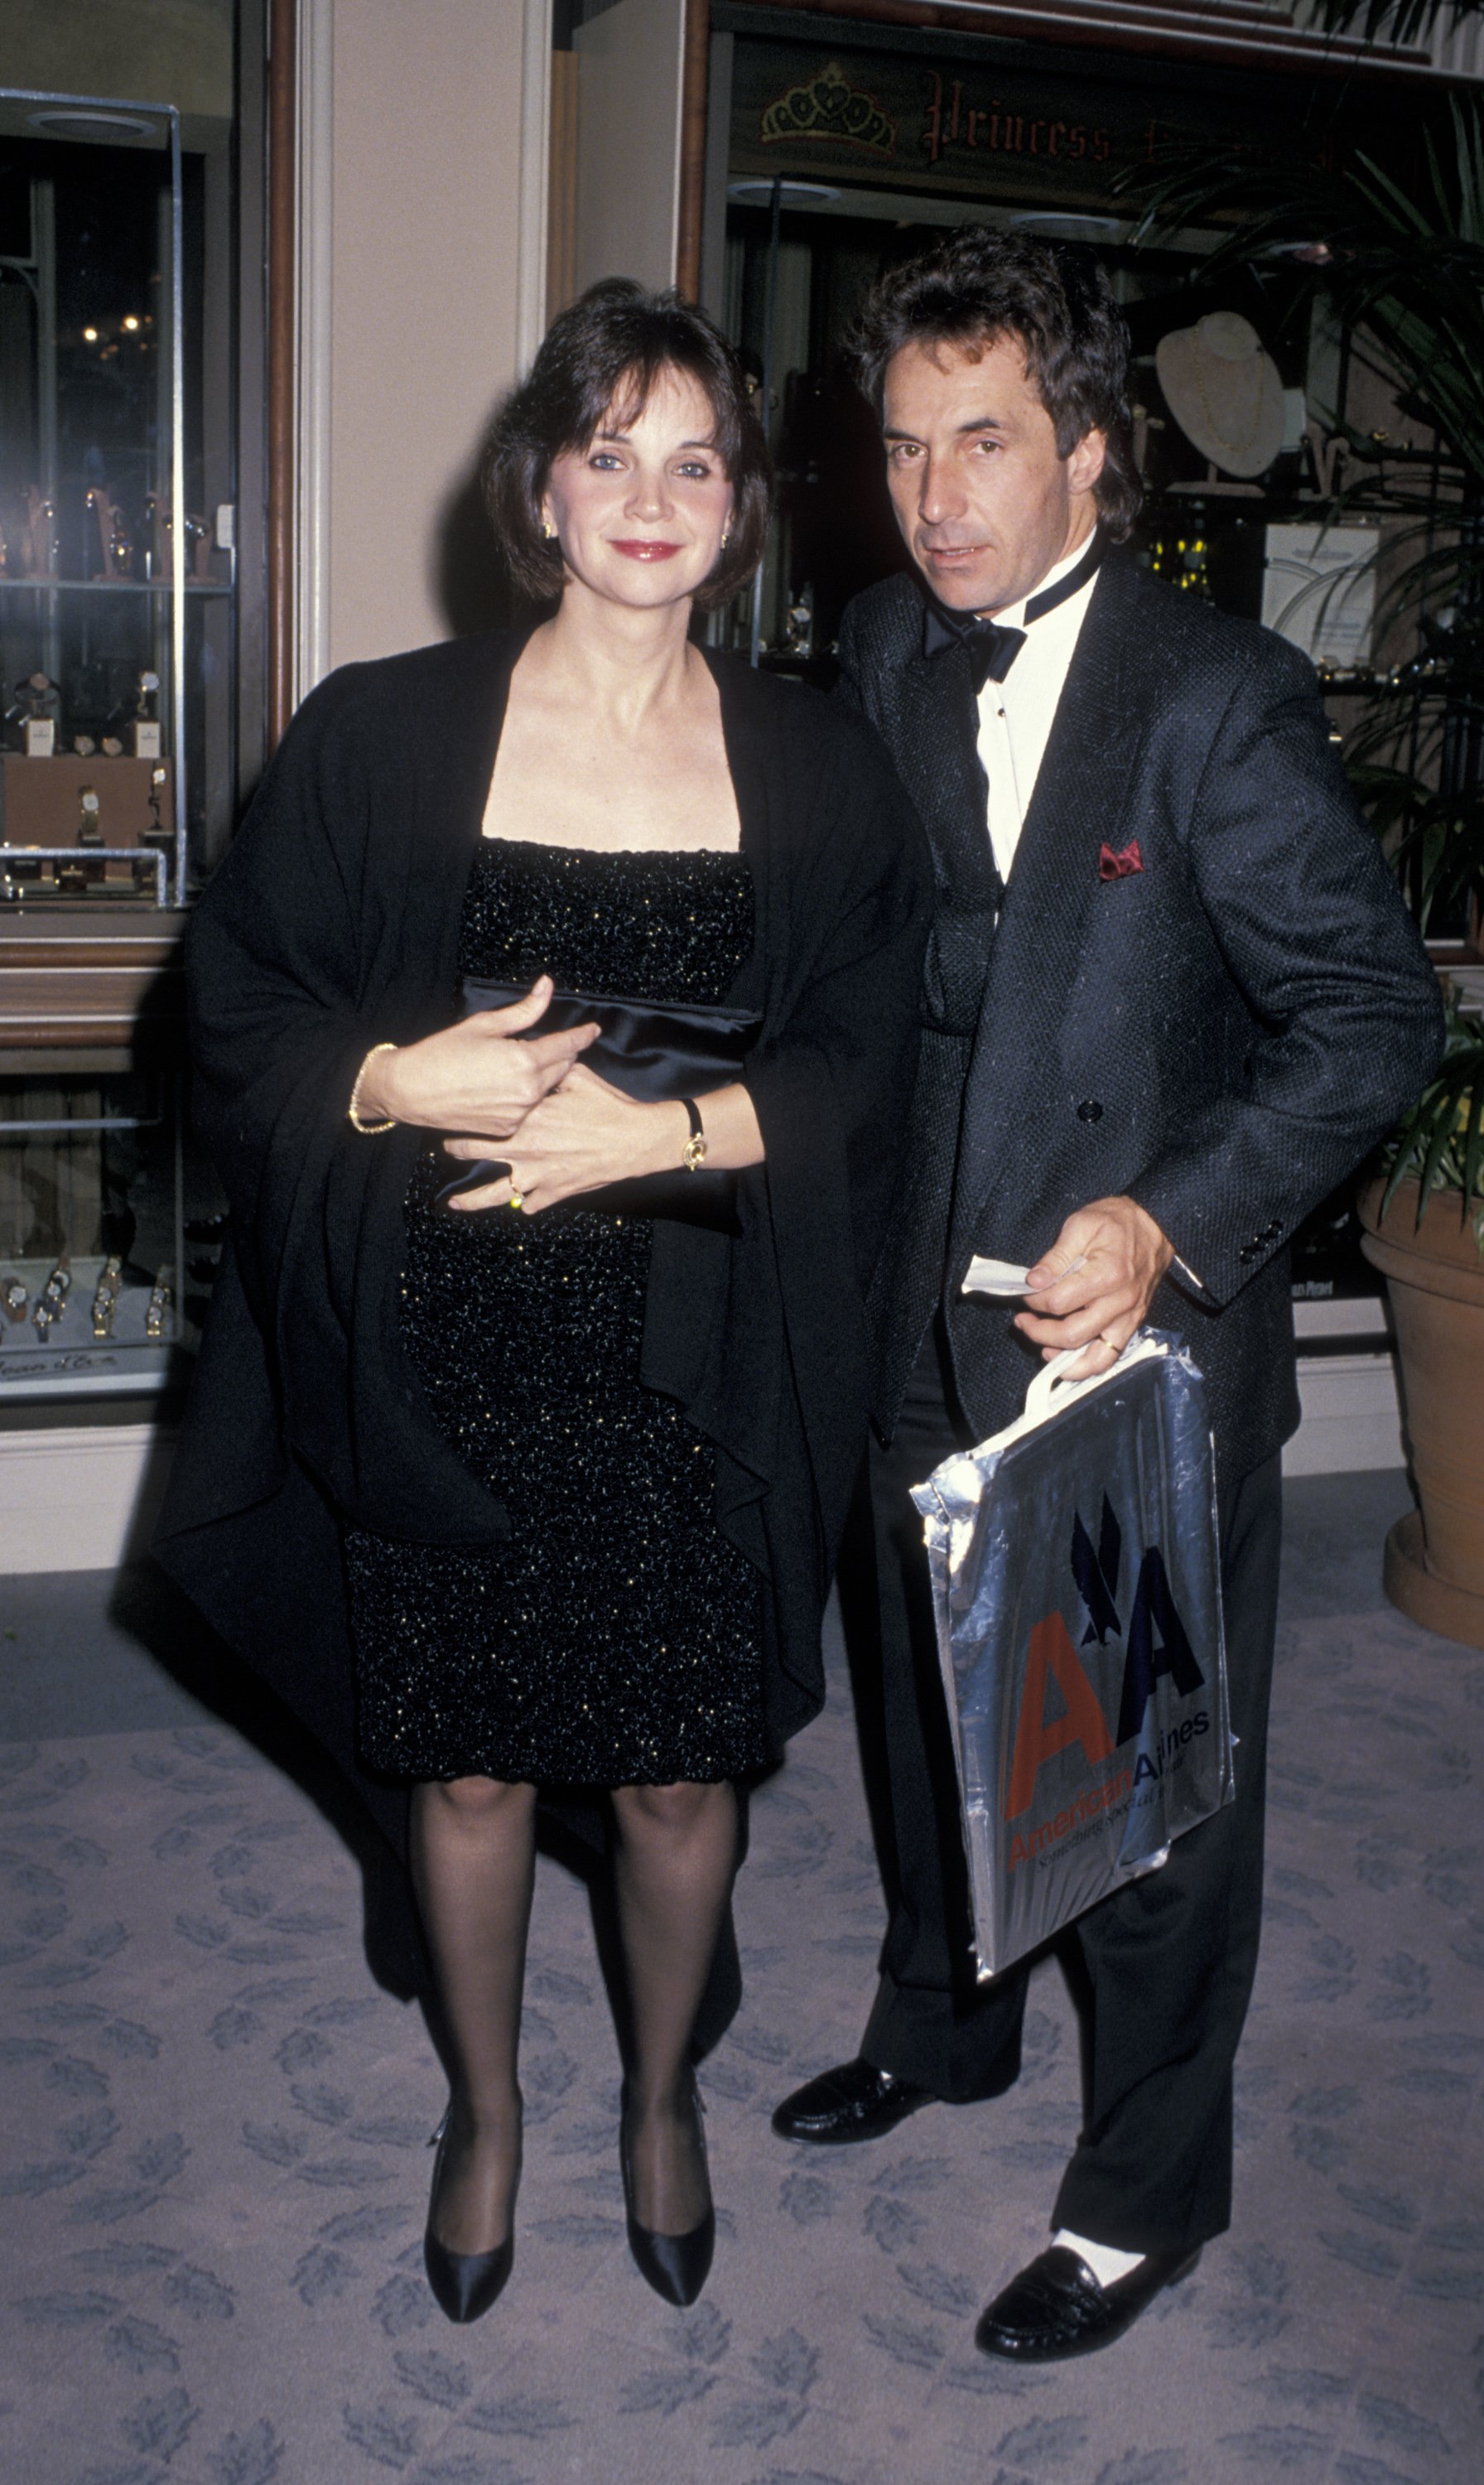 Cindy Williams and Bill Hudson during 6th Annual American Cinema Awards at Beverly Hilton Hotel on January 6, 1989 in Beverly Hills, California ┃Source: Getty Images